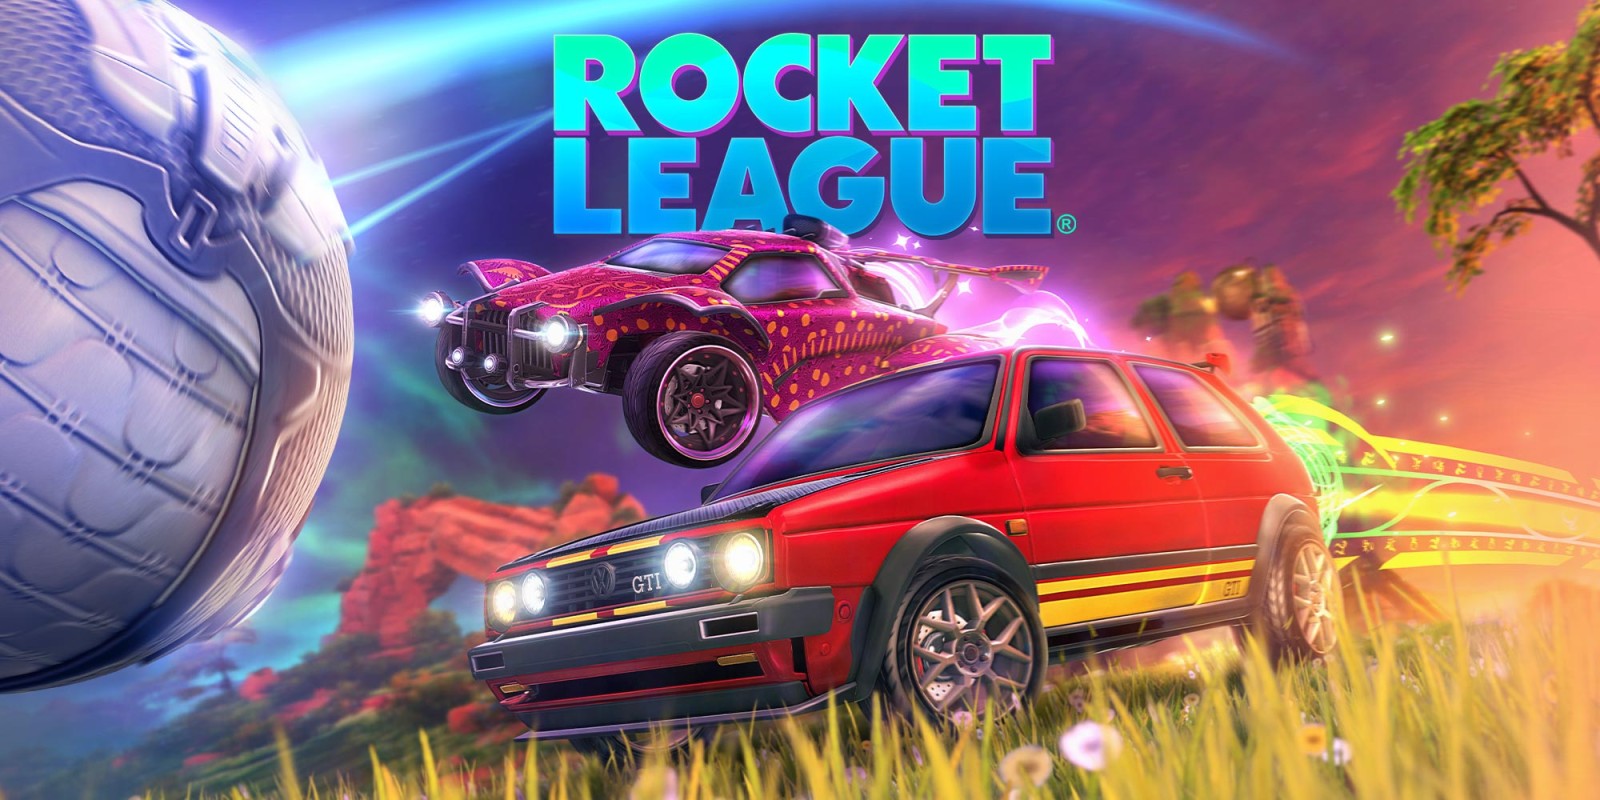 ROCKET LEAGUE PS5 Version Full Game Free Download